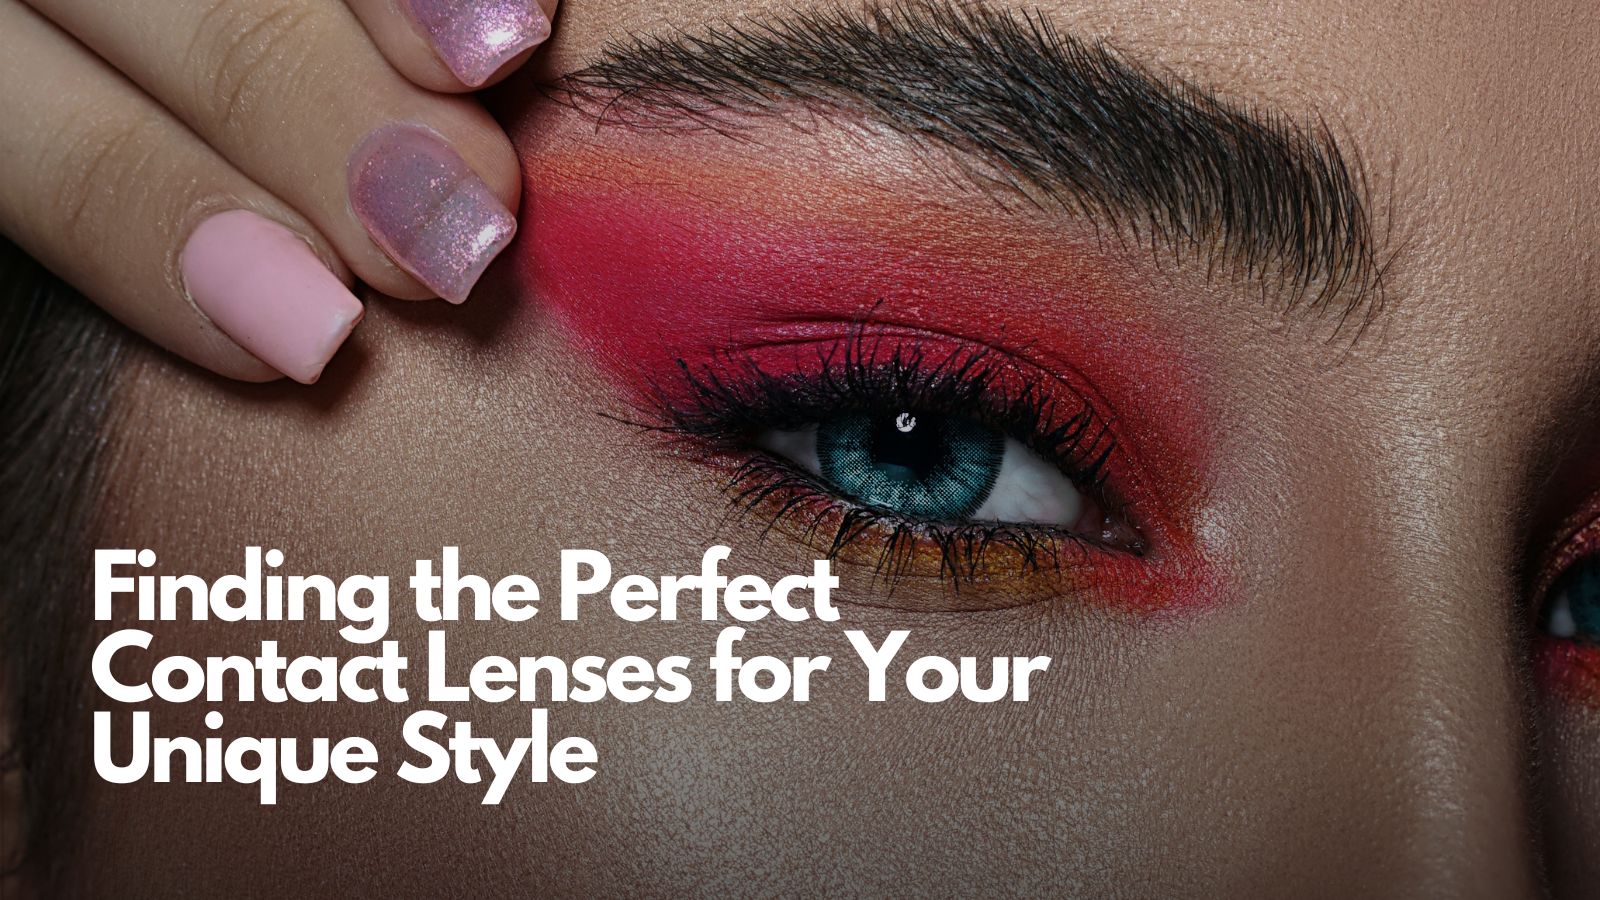 Lens Vogue: Crafting Your Signature Look with Aqualens